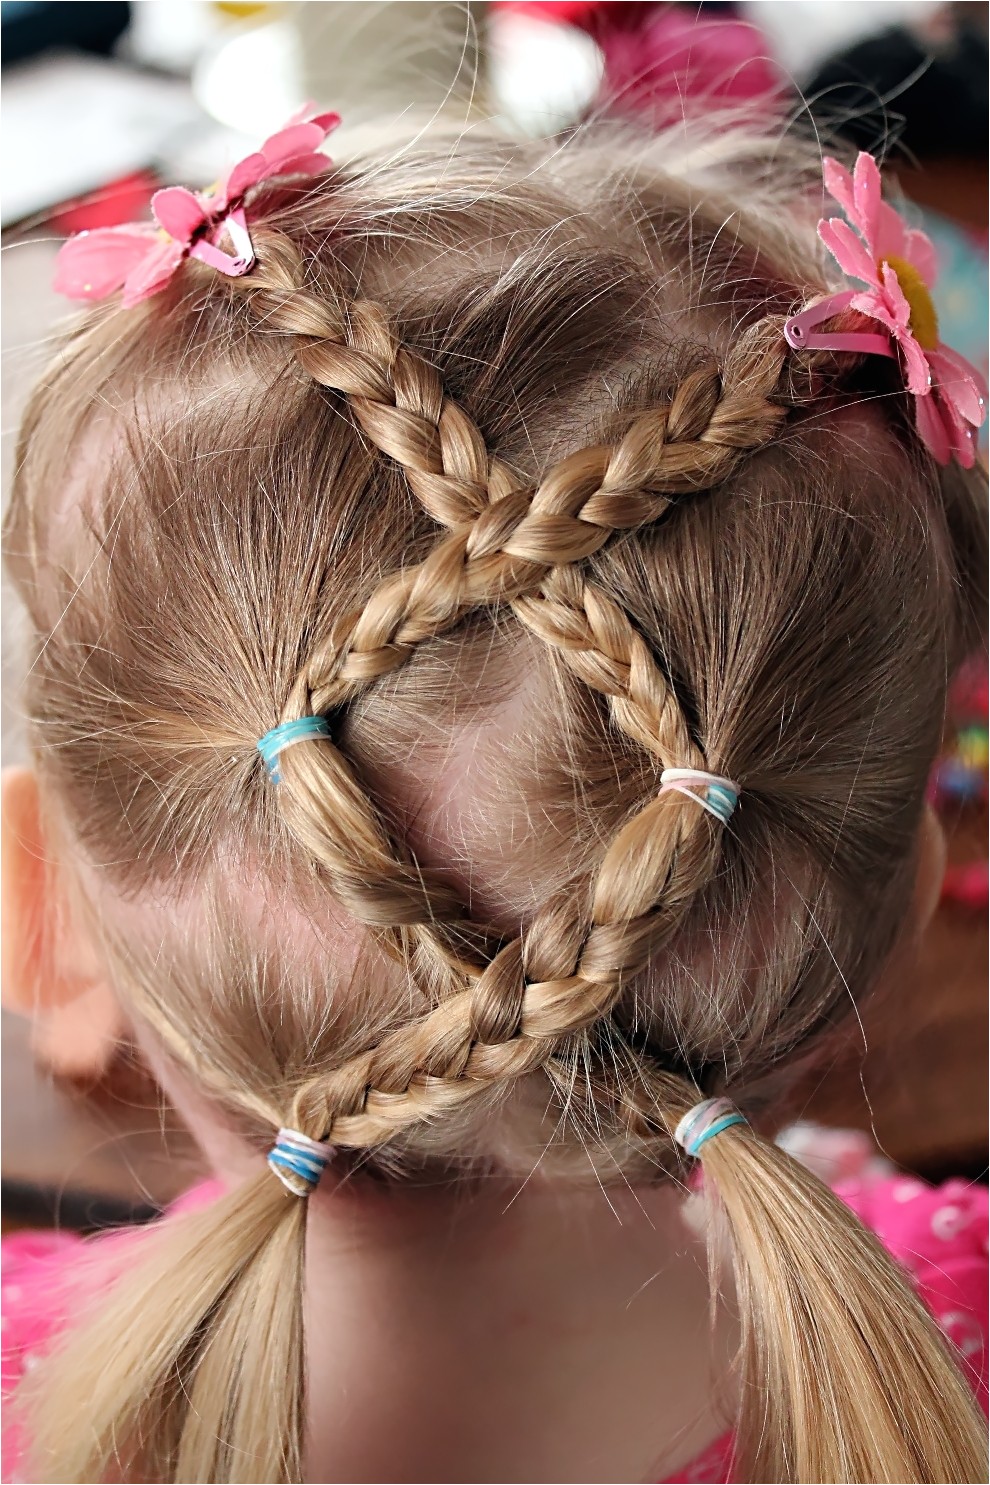 Cute 2 Year Old Hairstyles Cute Hairstyles for 2 Year Olds